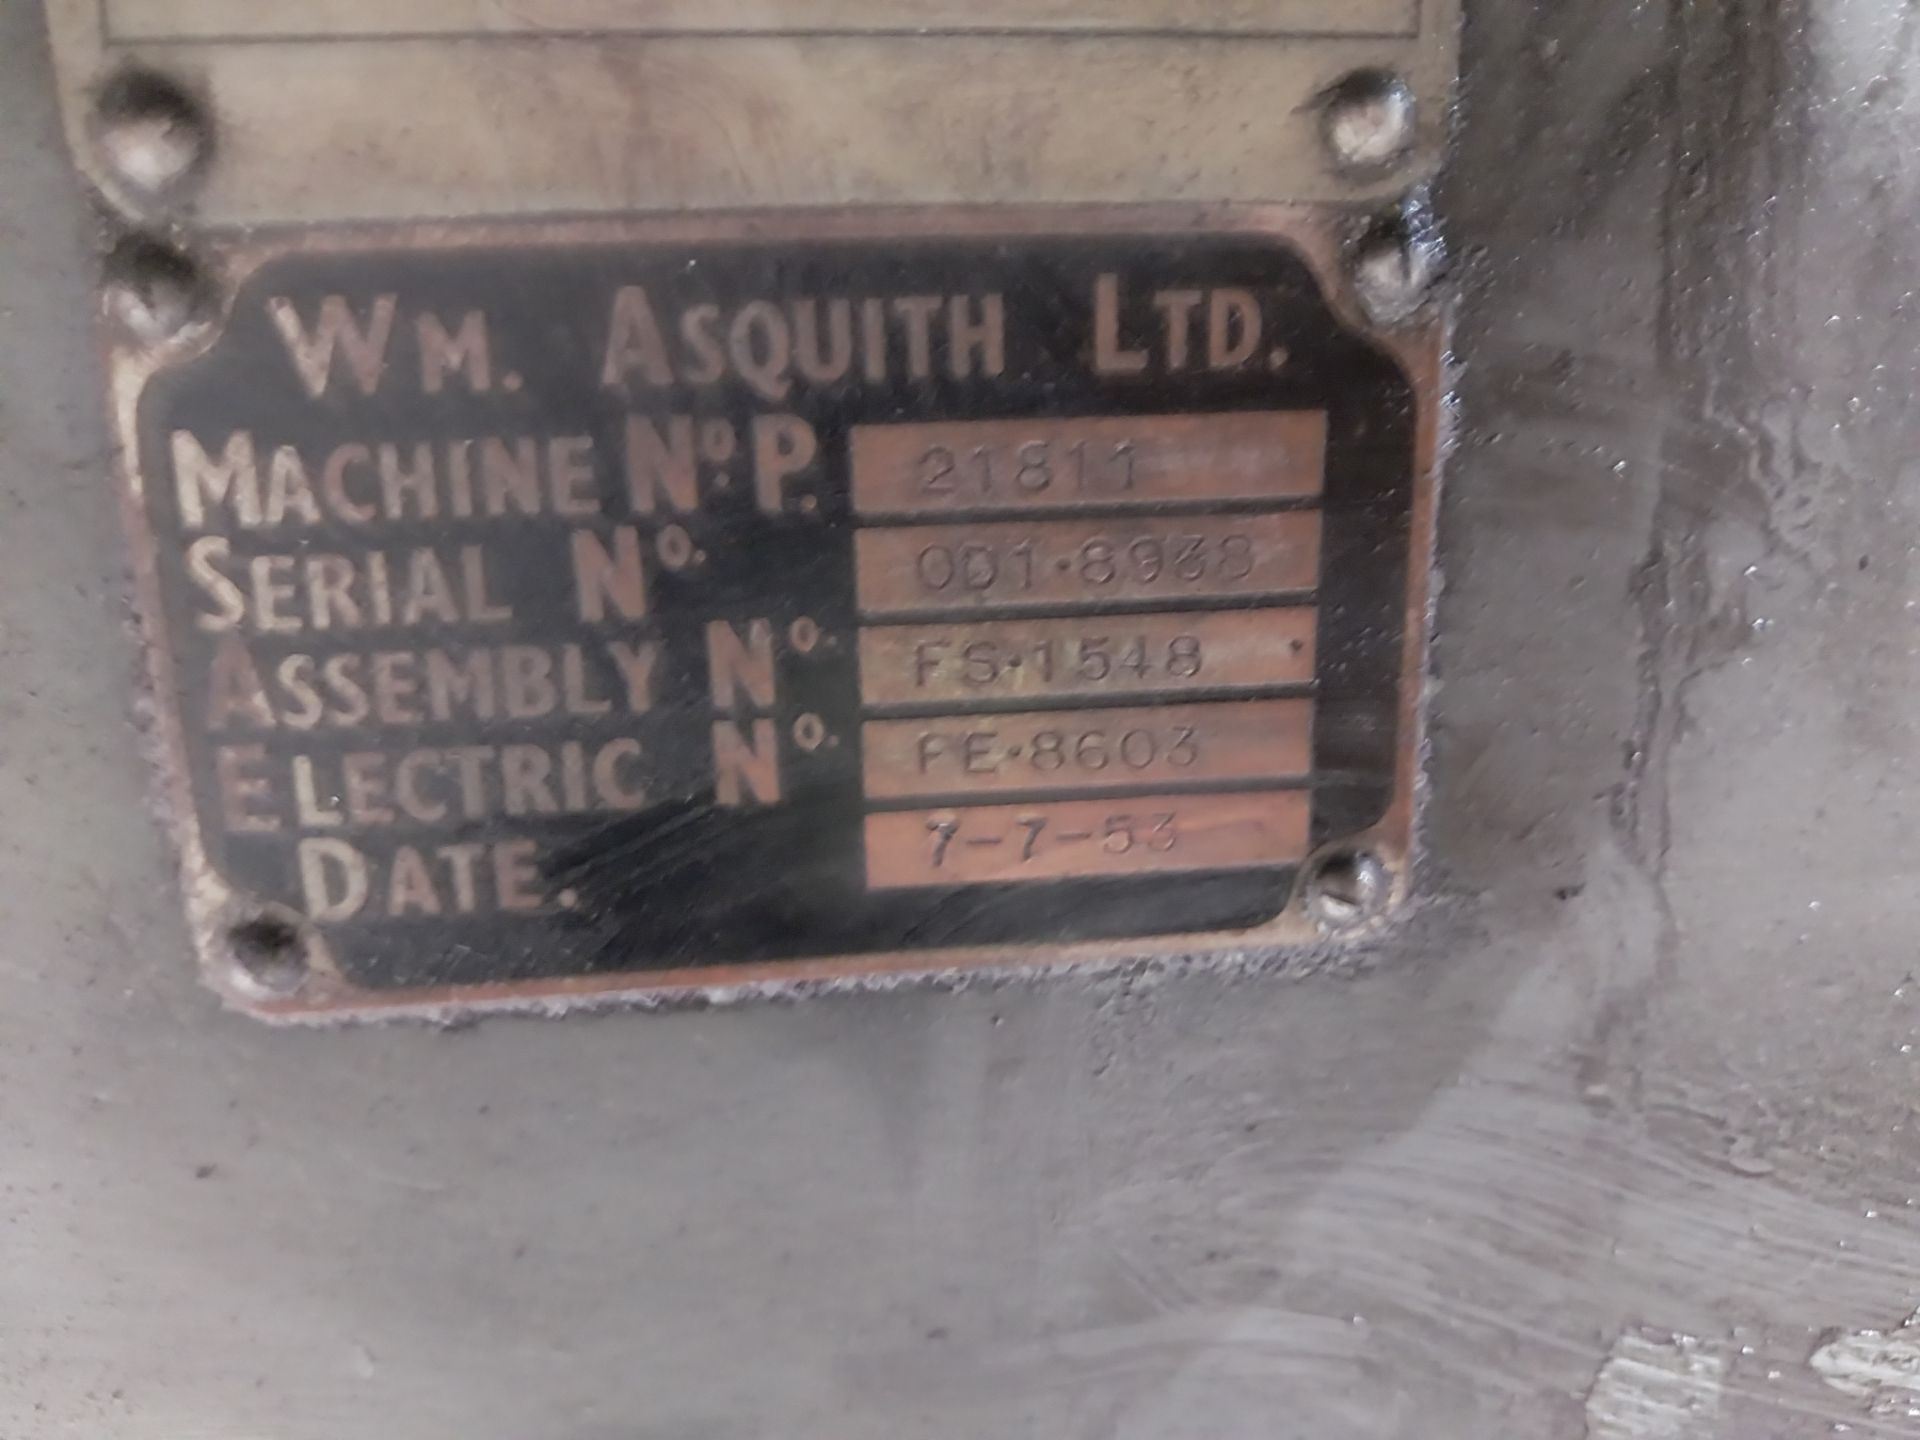 Asquith 21811 radial arm drill with steel block, Serial number 001. 8938, assembly no. FS1548, - Image 4 of 8